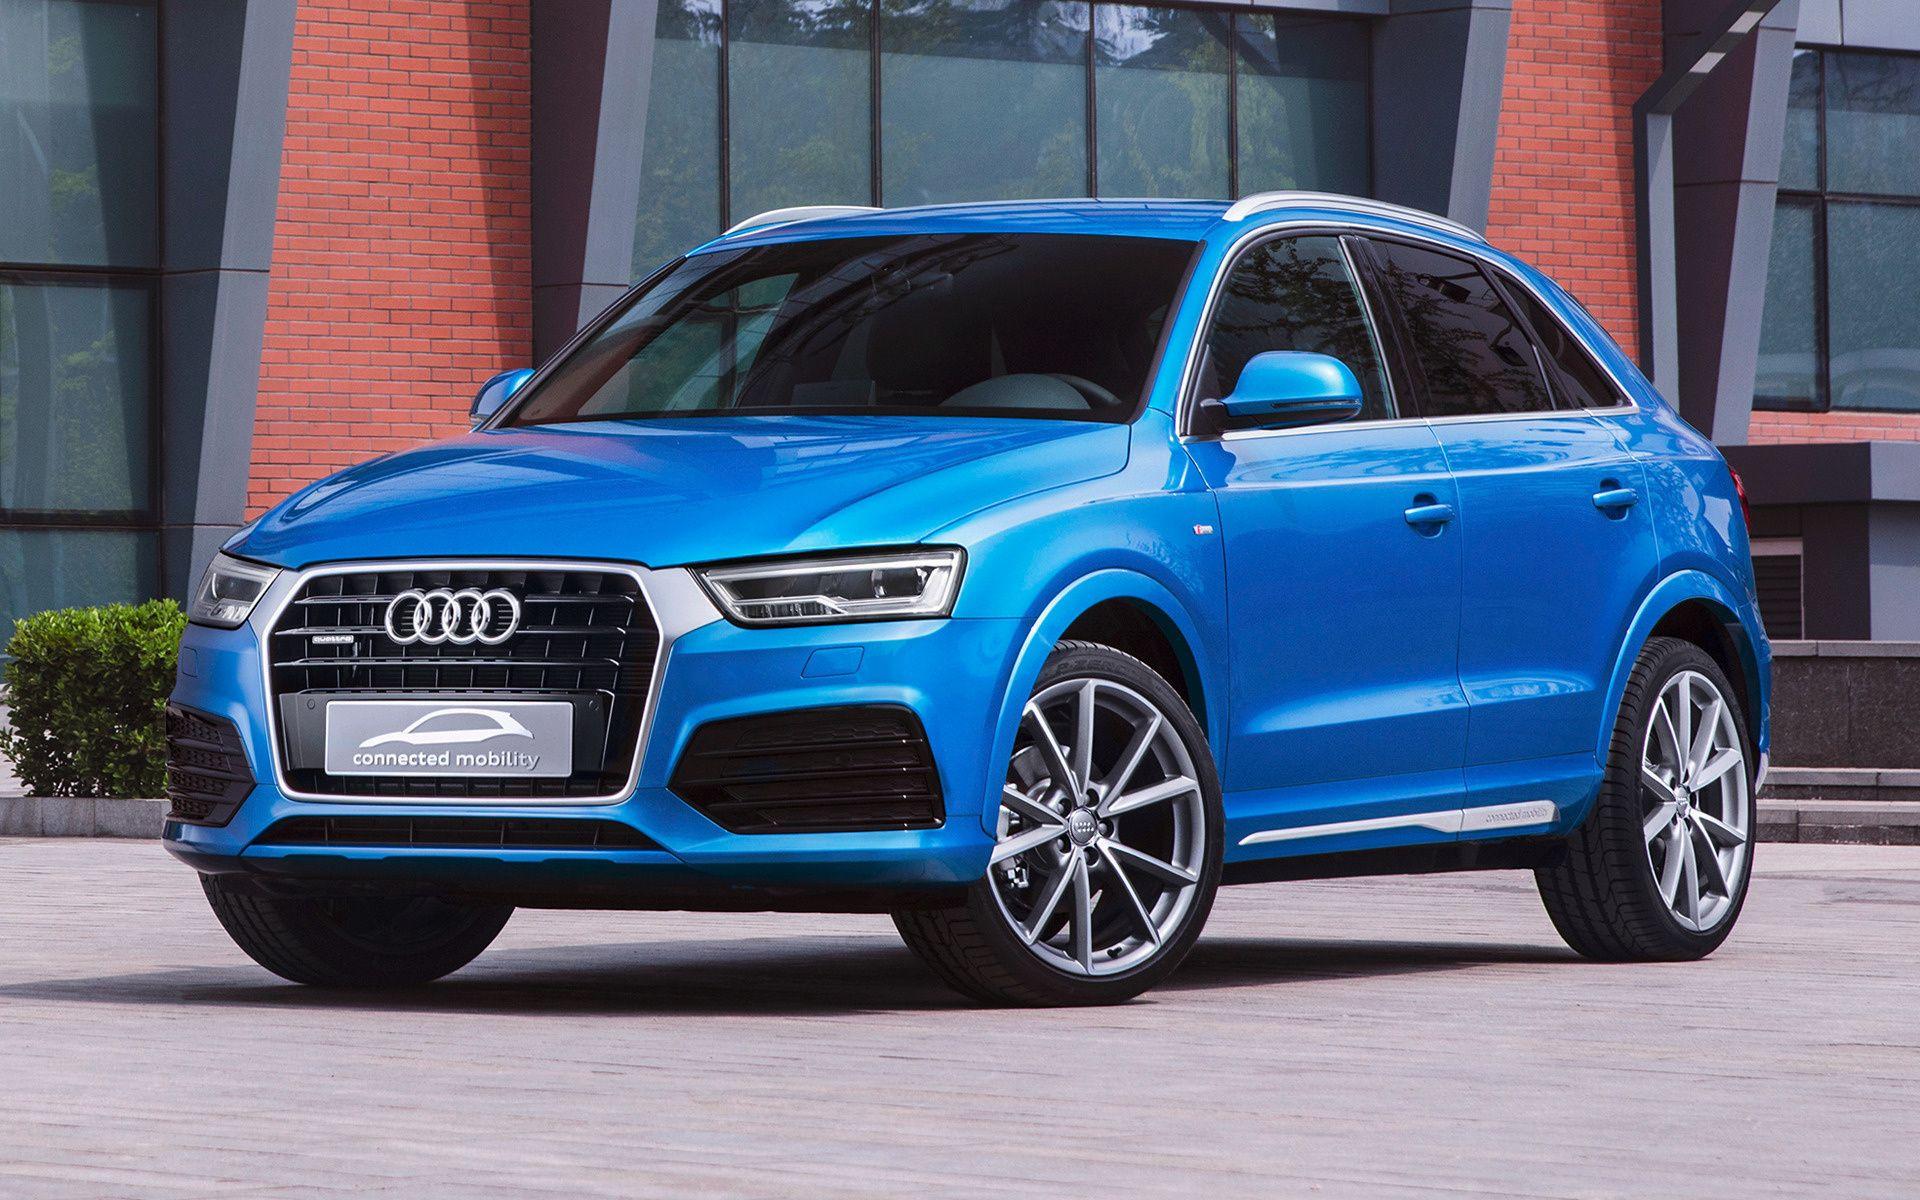 Audi Q3 connected mobility concept (2016) Wallpaper and HD Image